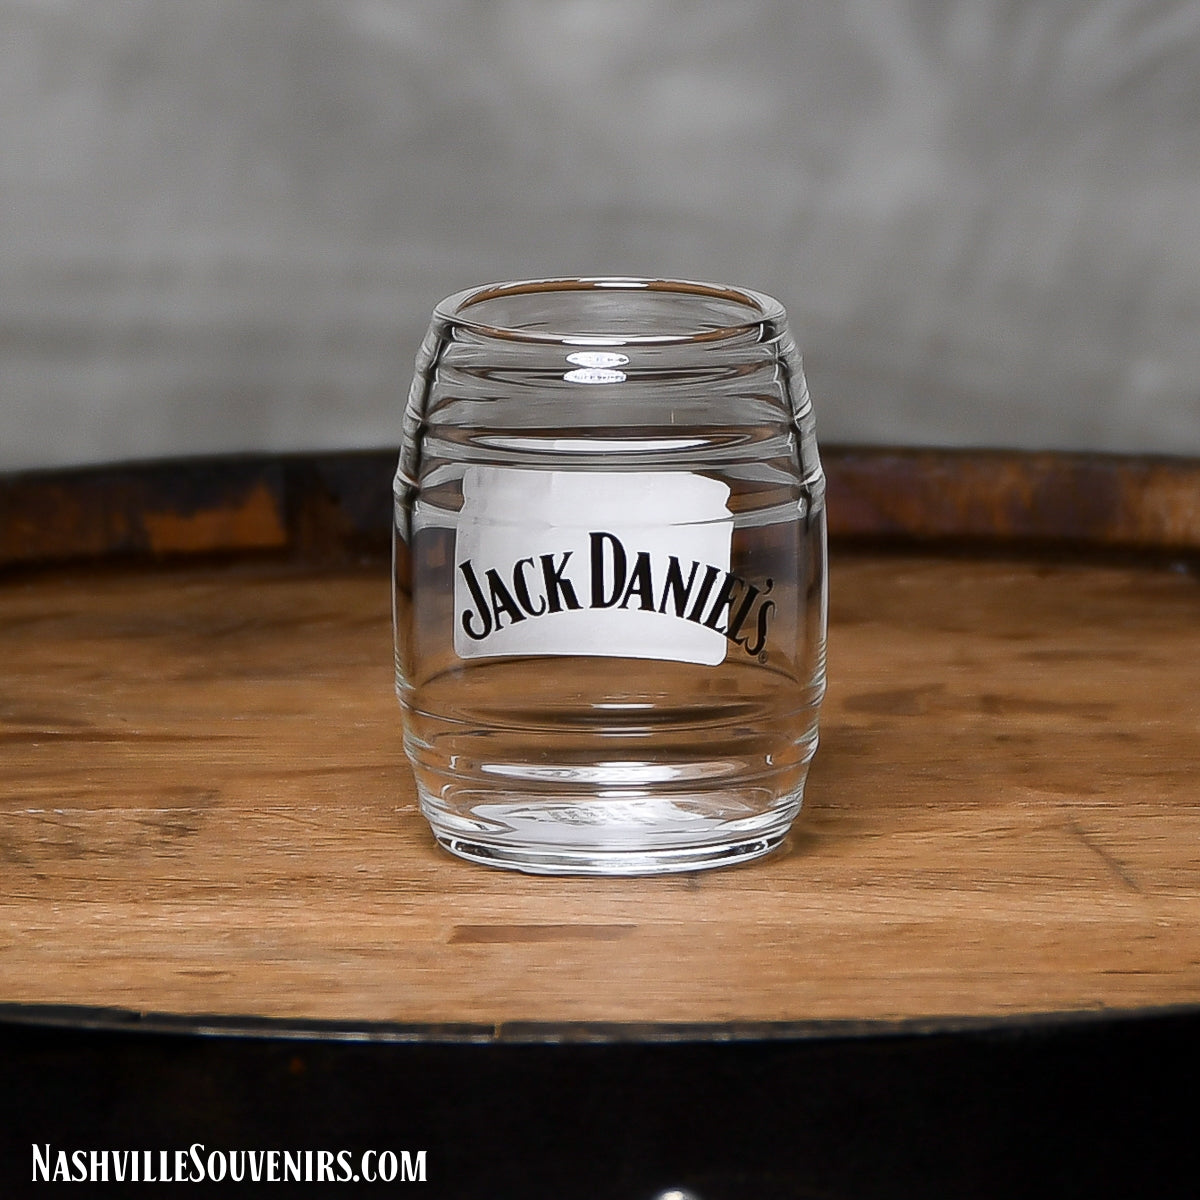 Officially licensed Jack Daniels Glass Barrel Shot Glass. Get yours today with FREE SHIPPING on all US orders over $75!